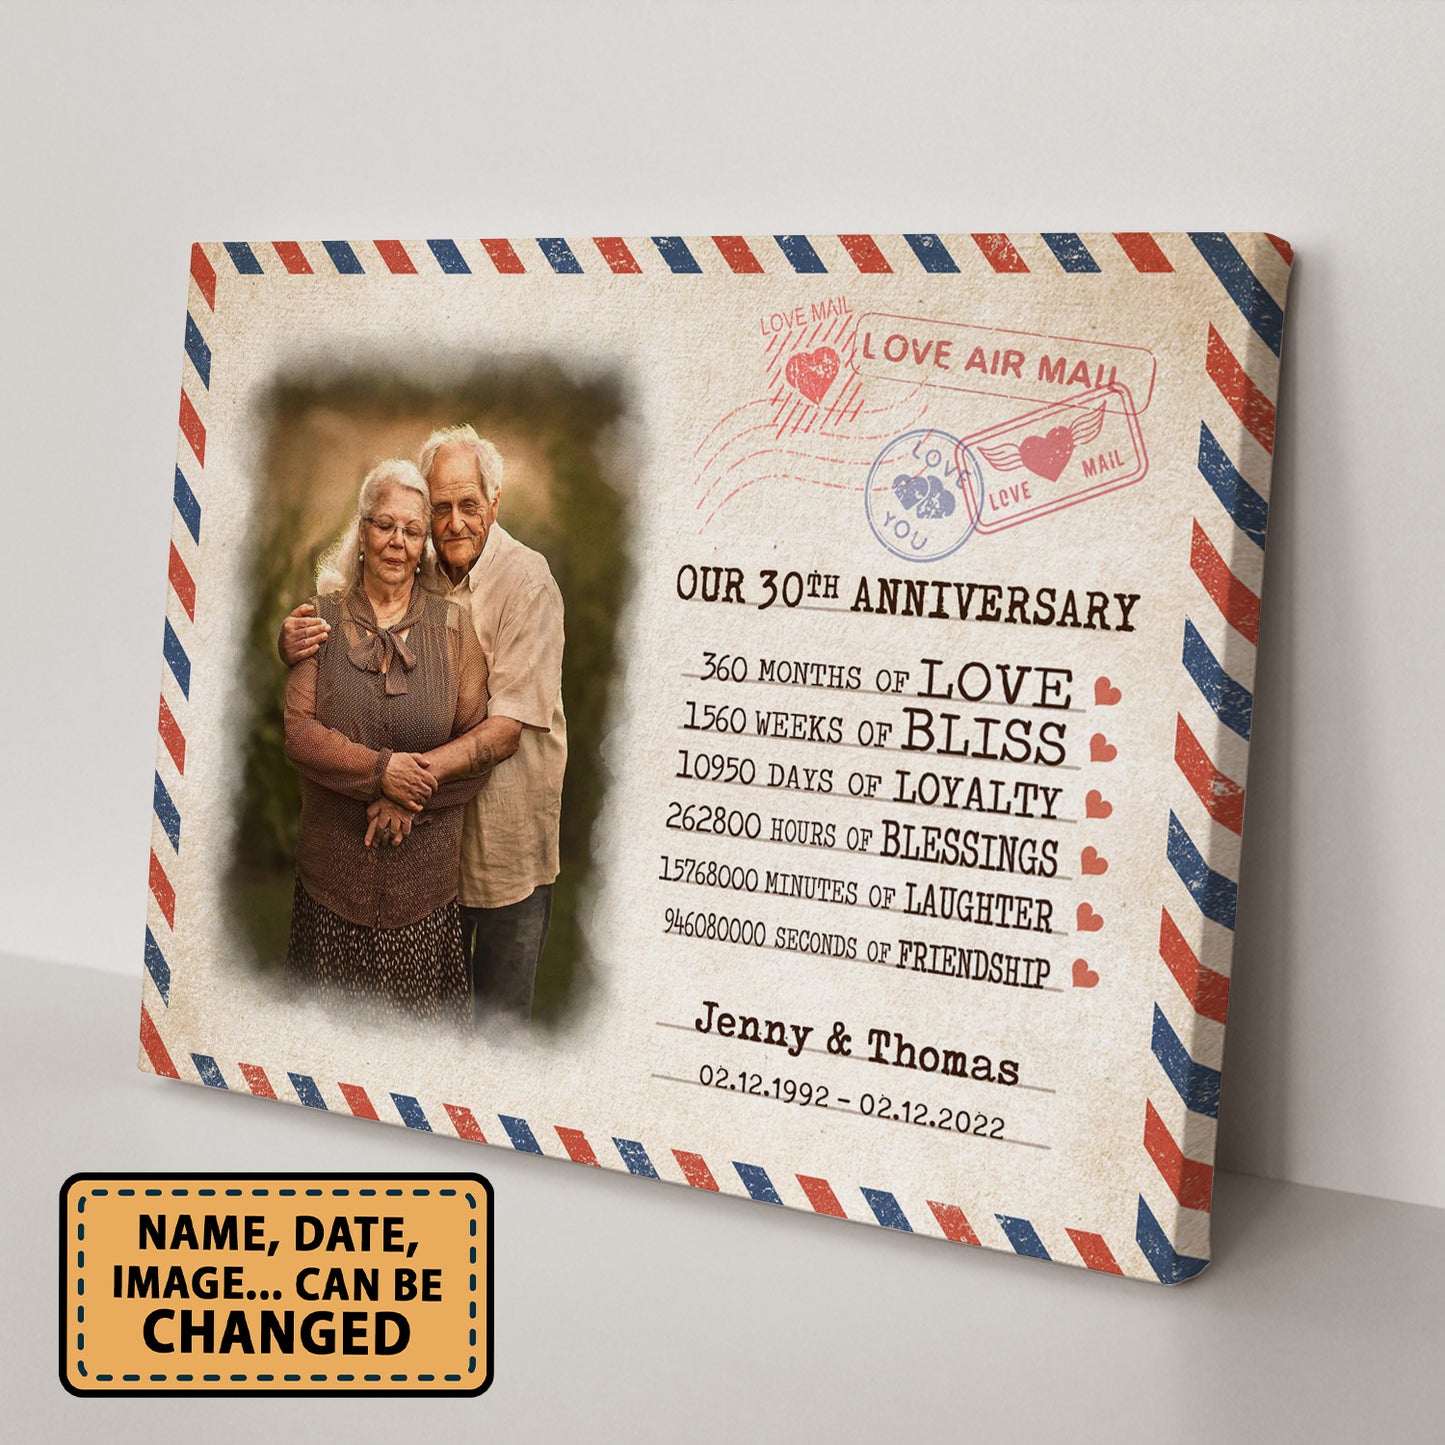 Our 30th Anniversary Letter Valentine Gift Personalized Canvas